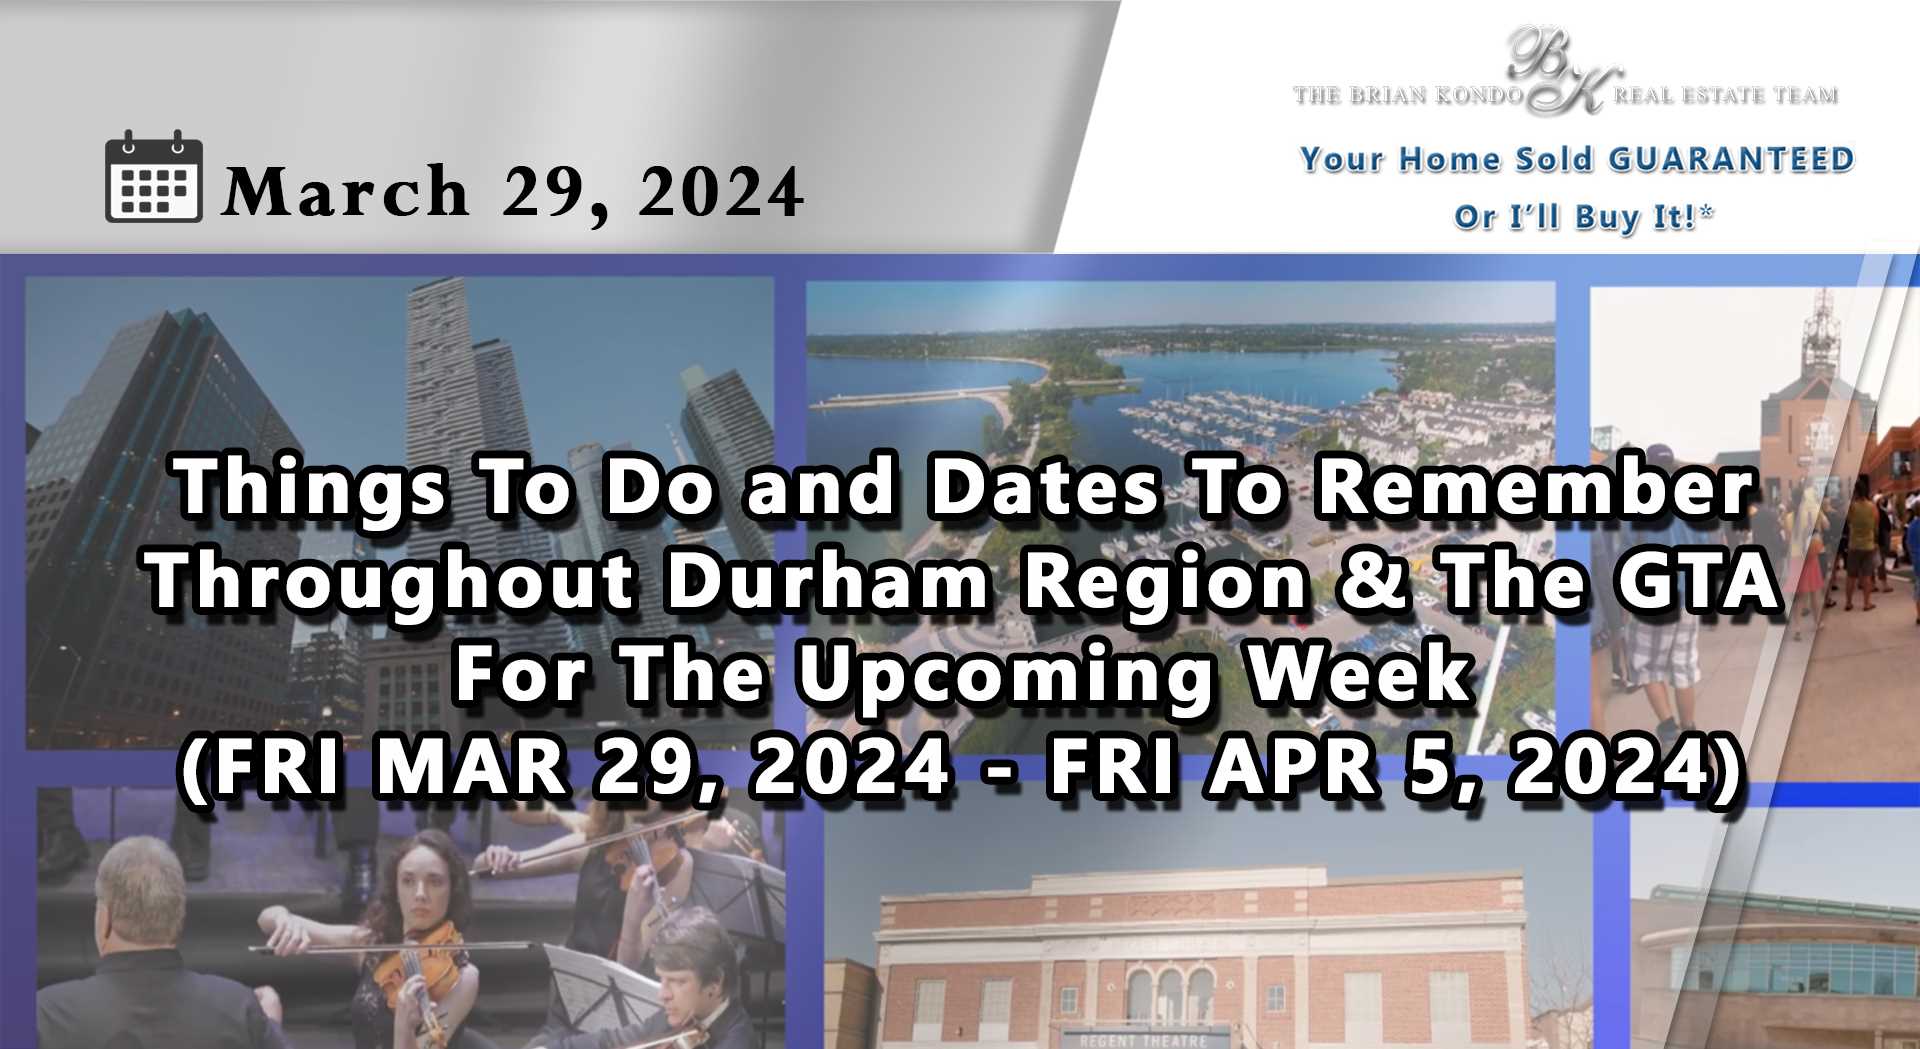 Things To Do and Dates To Remember Throughout Durham Region and The GTA For The Upcoming Week (FRI MAR 29, 2024 - FRI APR 5, 2024)